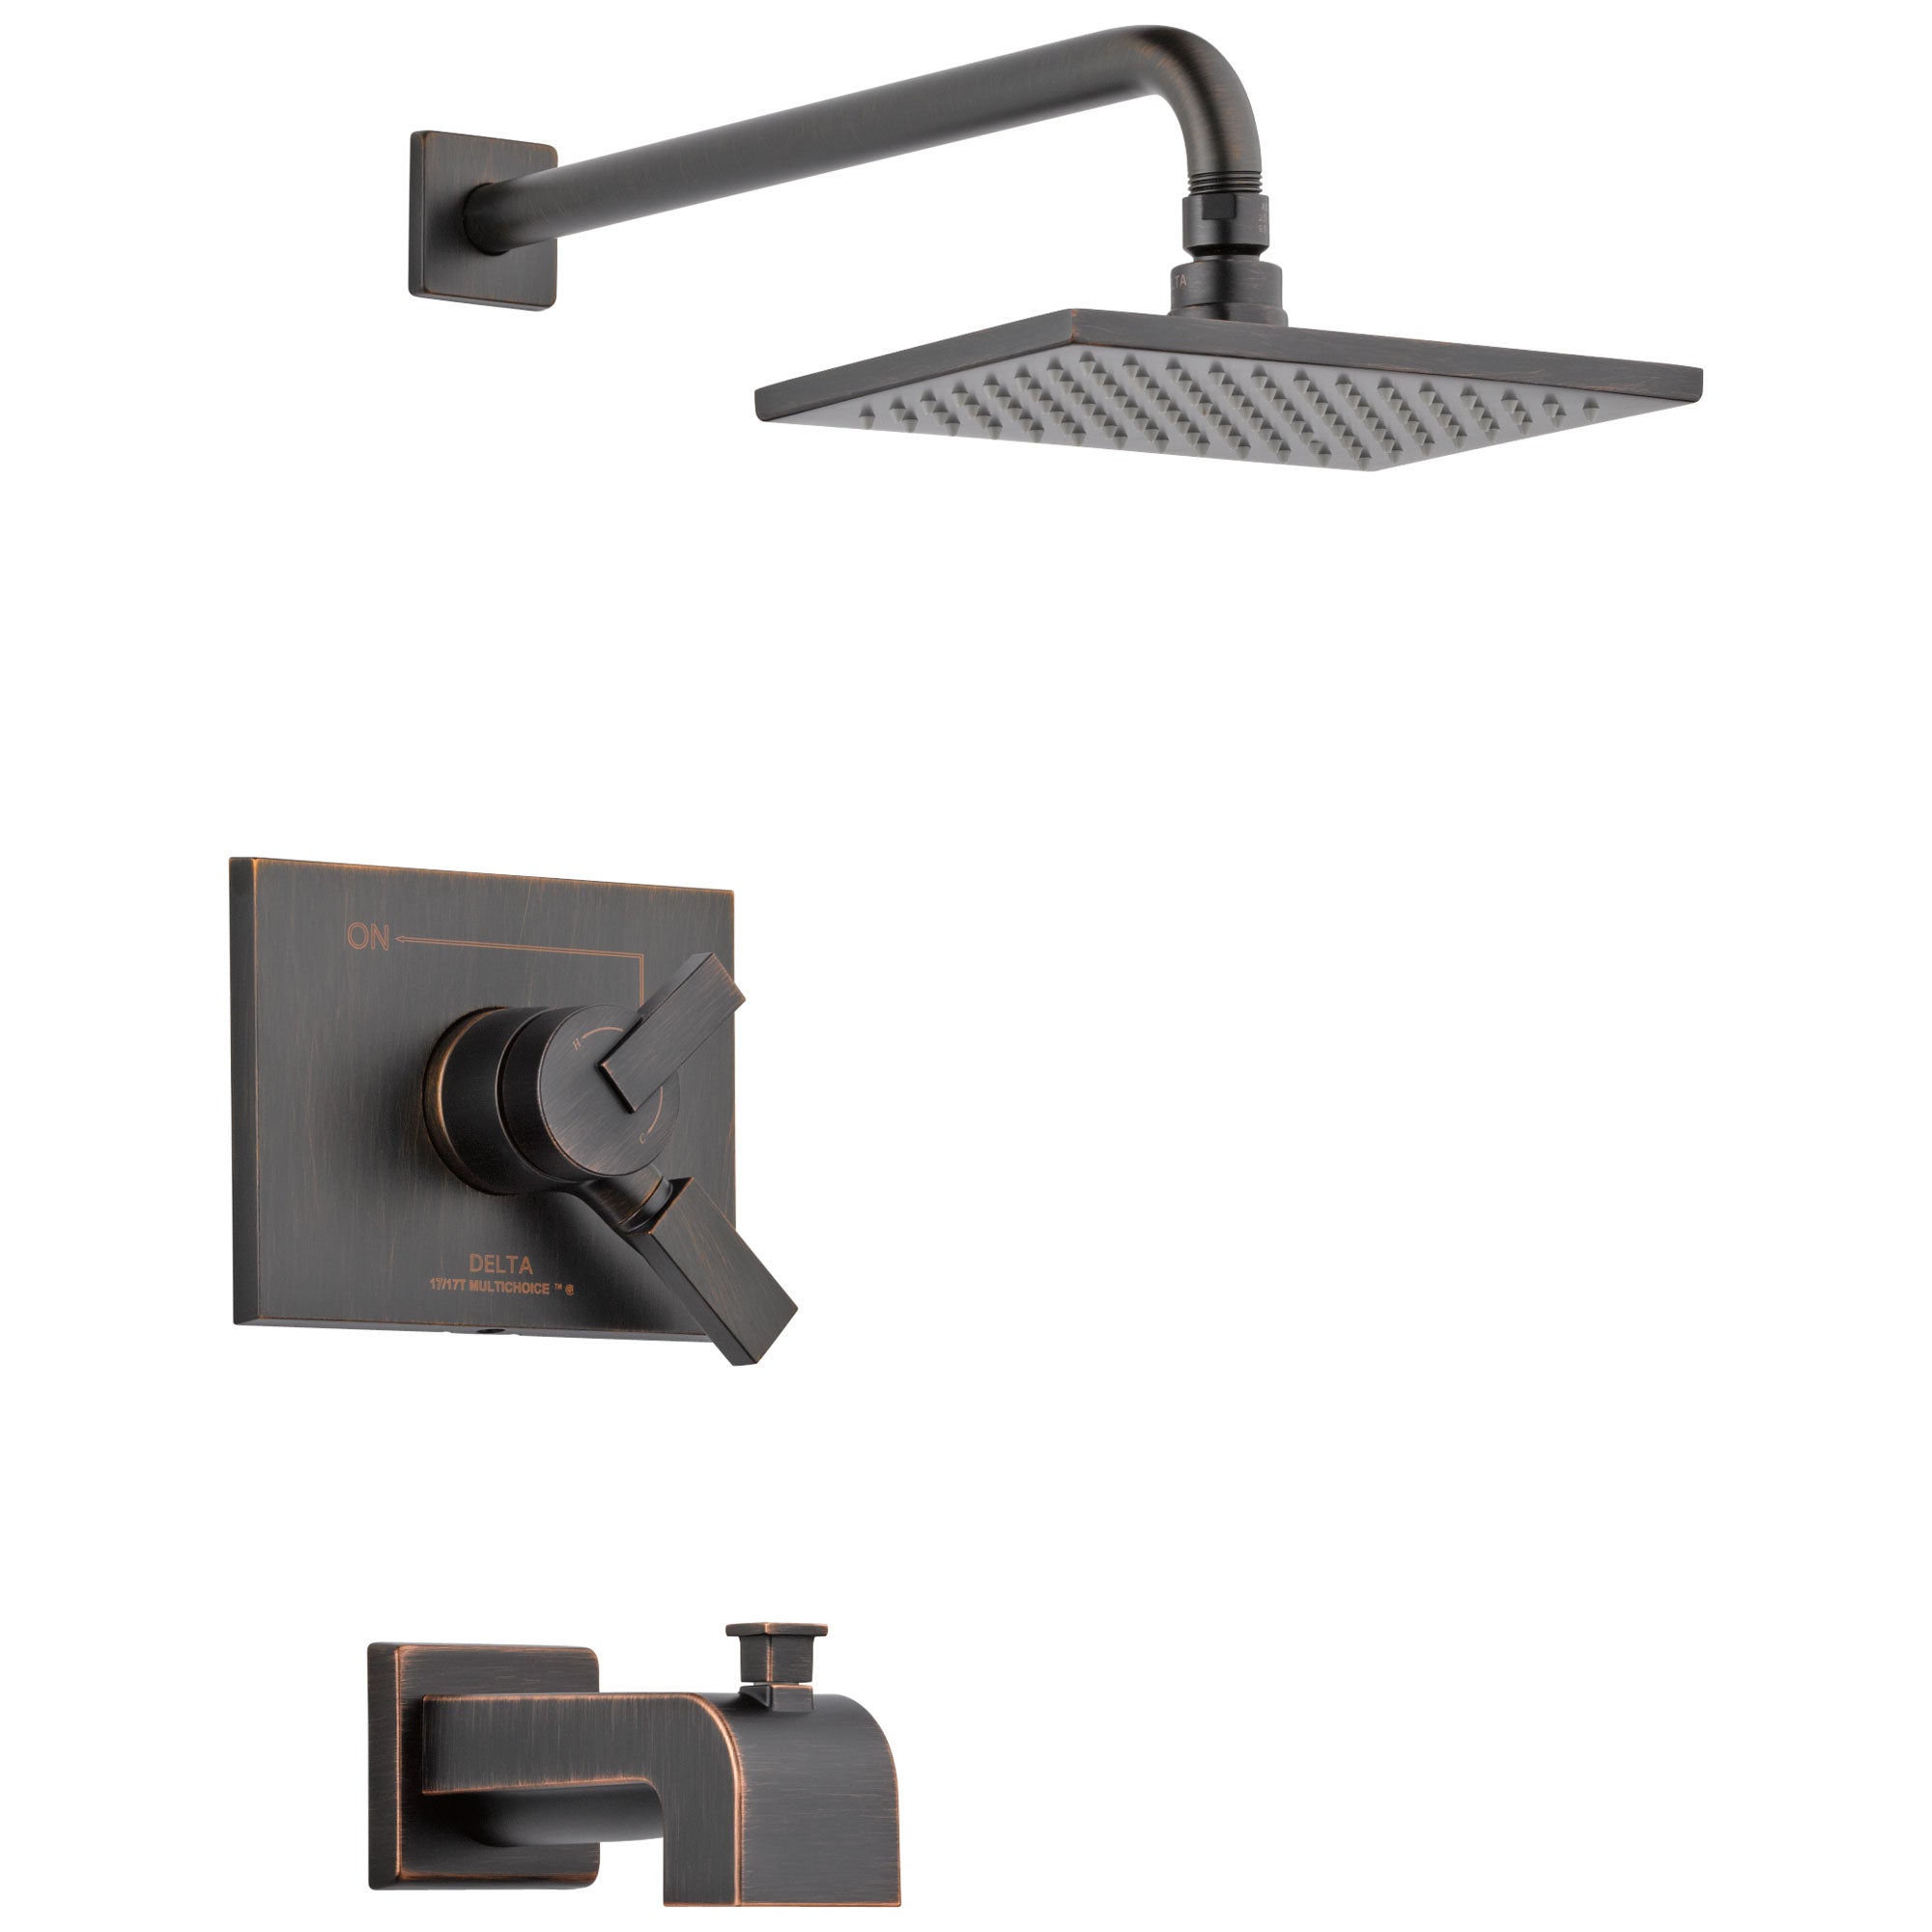 Delta Vero Venetian Bronze Finish Water Efficient Tub & Shower Combo Faucet Includes 17 Series Cartridge, Handles, and Valve with Stops D3346V